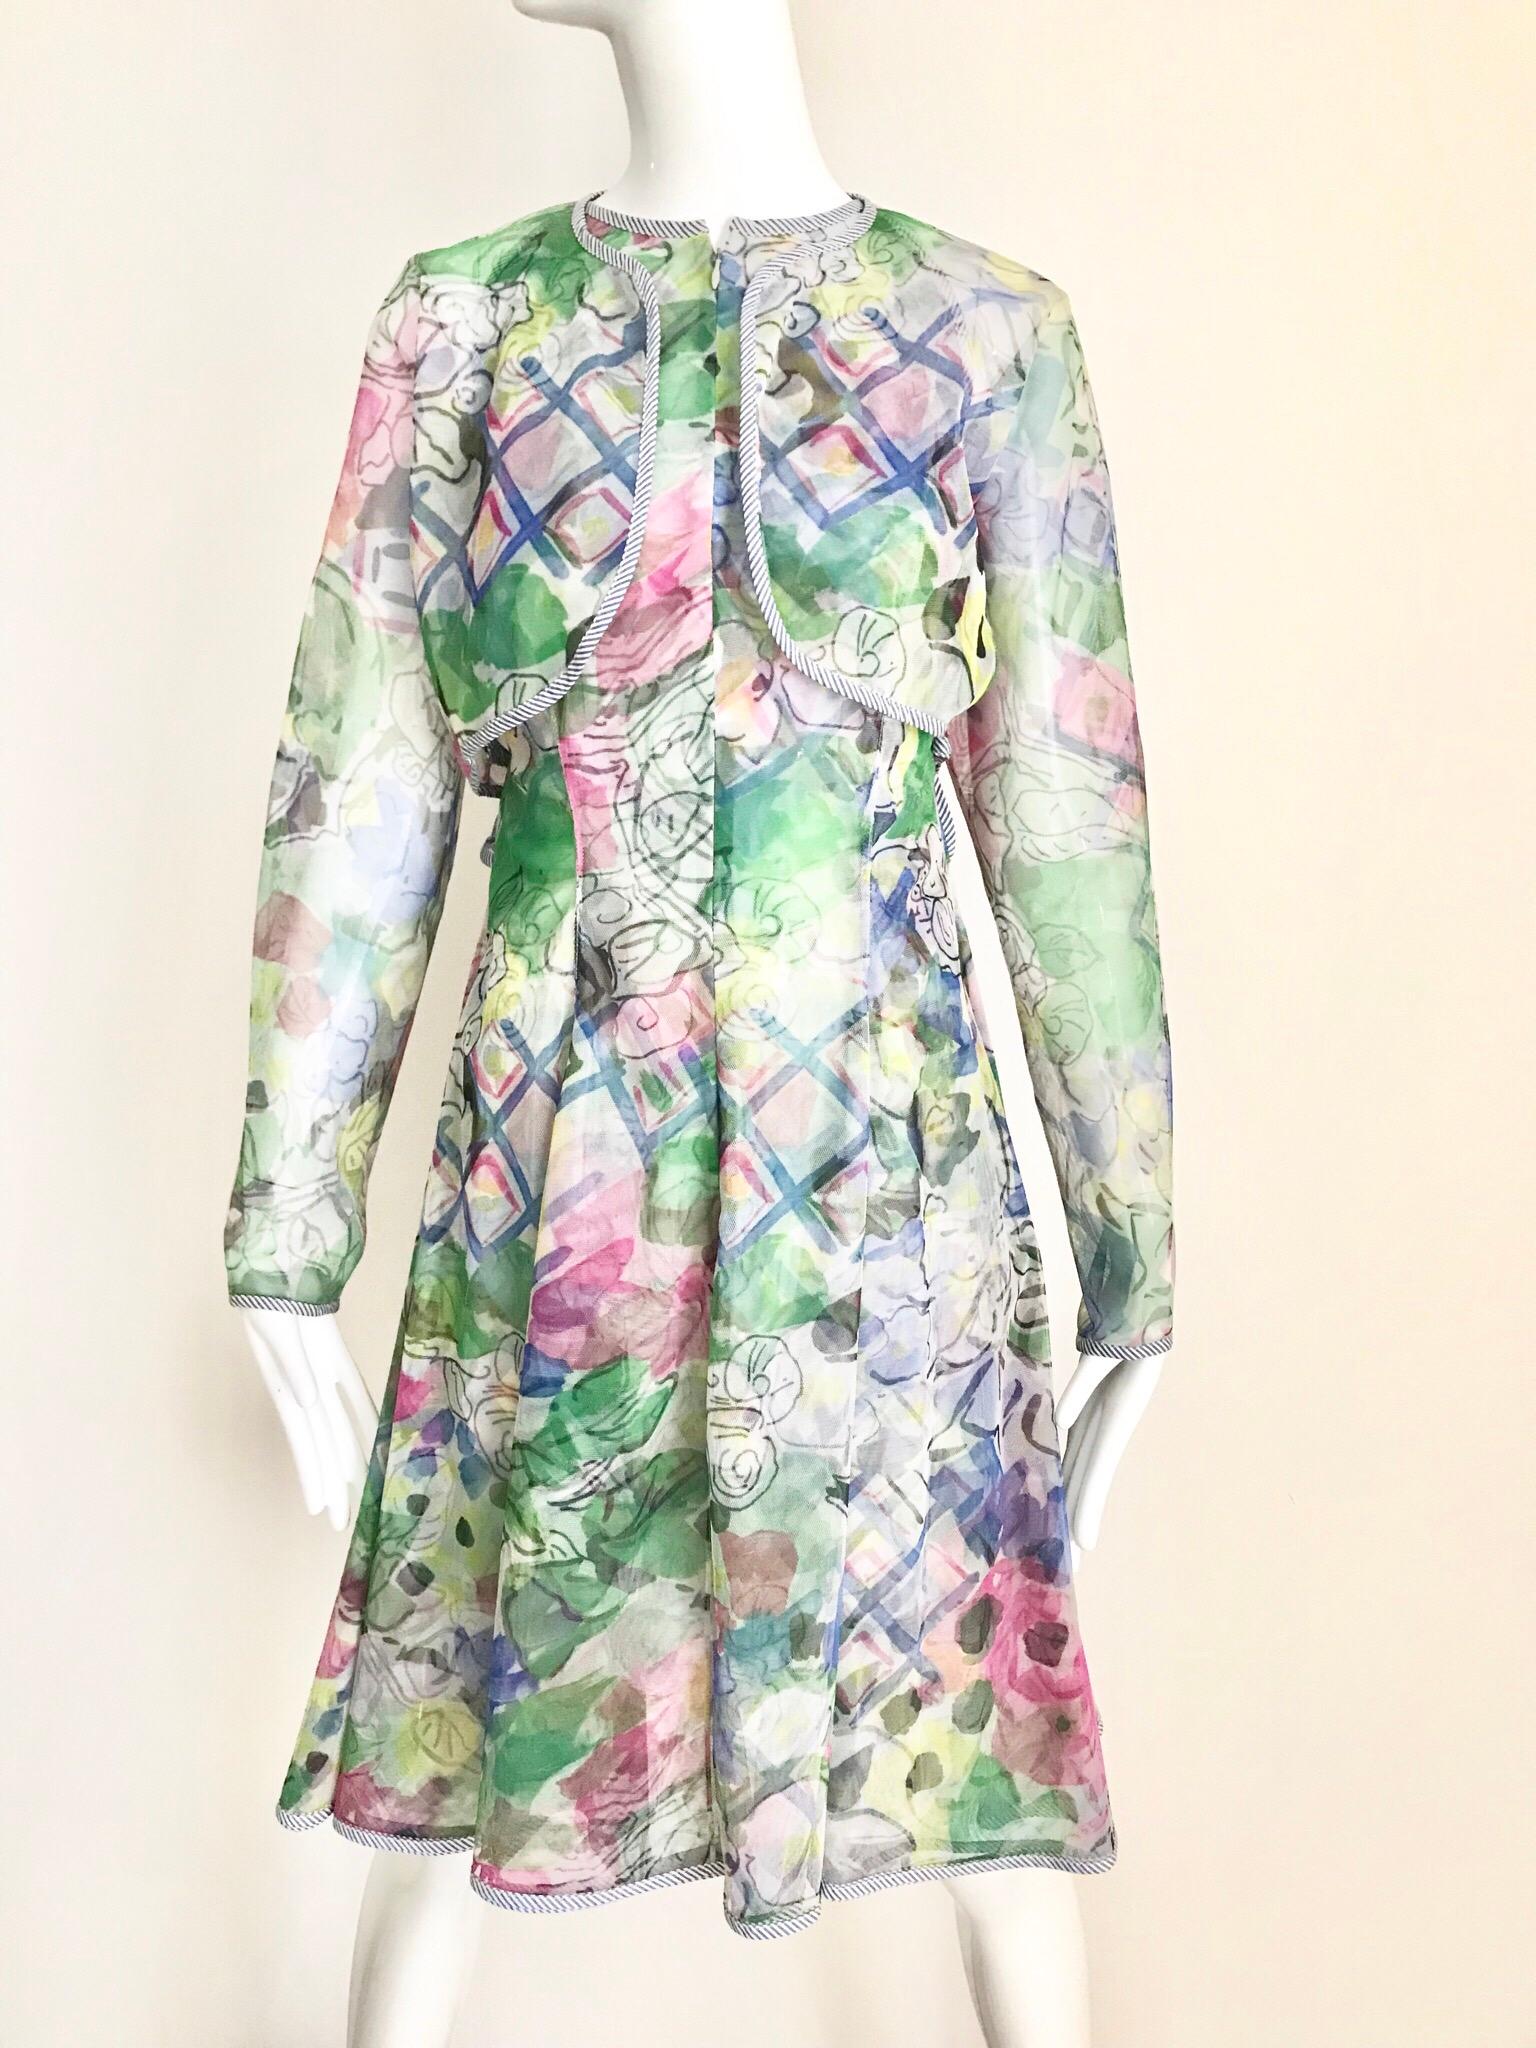 Late 1980s Geoffey Beene beautiful cocktail dress in green, blue and light pink. Dress come with crop jacket.  Dress has front zipper.
Dress size: Small- Medium ( see measurement below)
Bust: 34 inches/ Waist: 28 inches / Dress length; 38.5